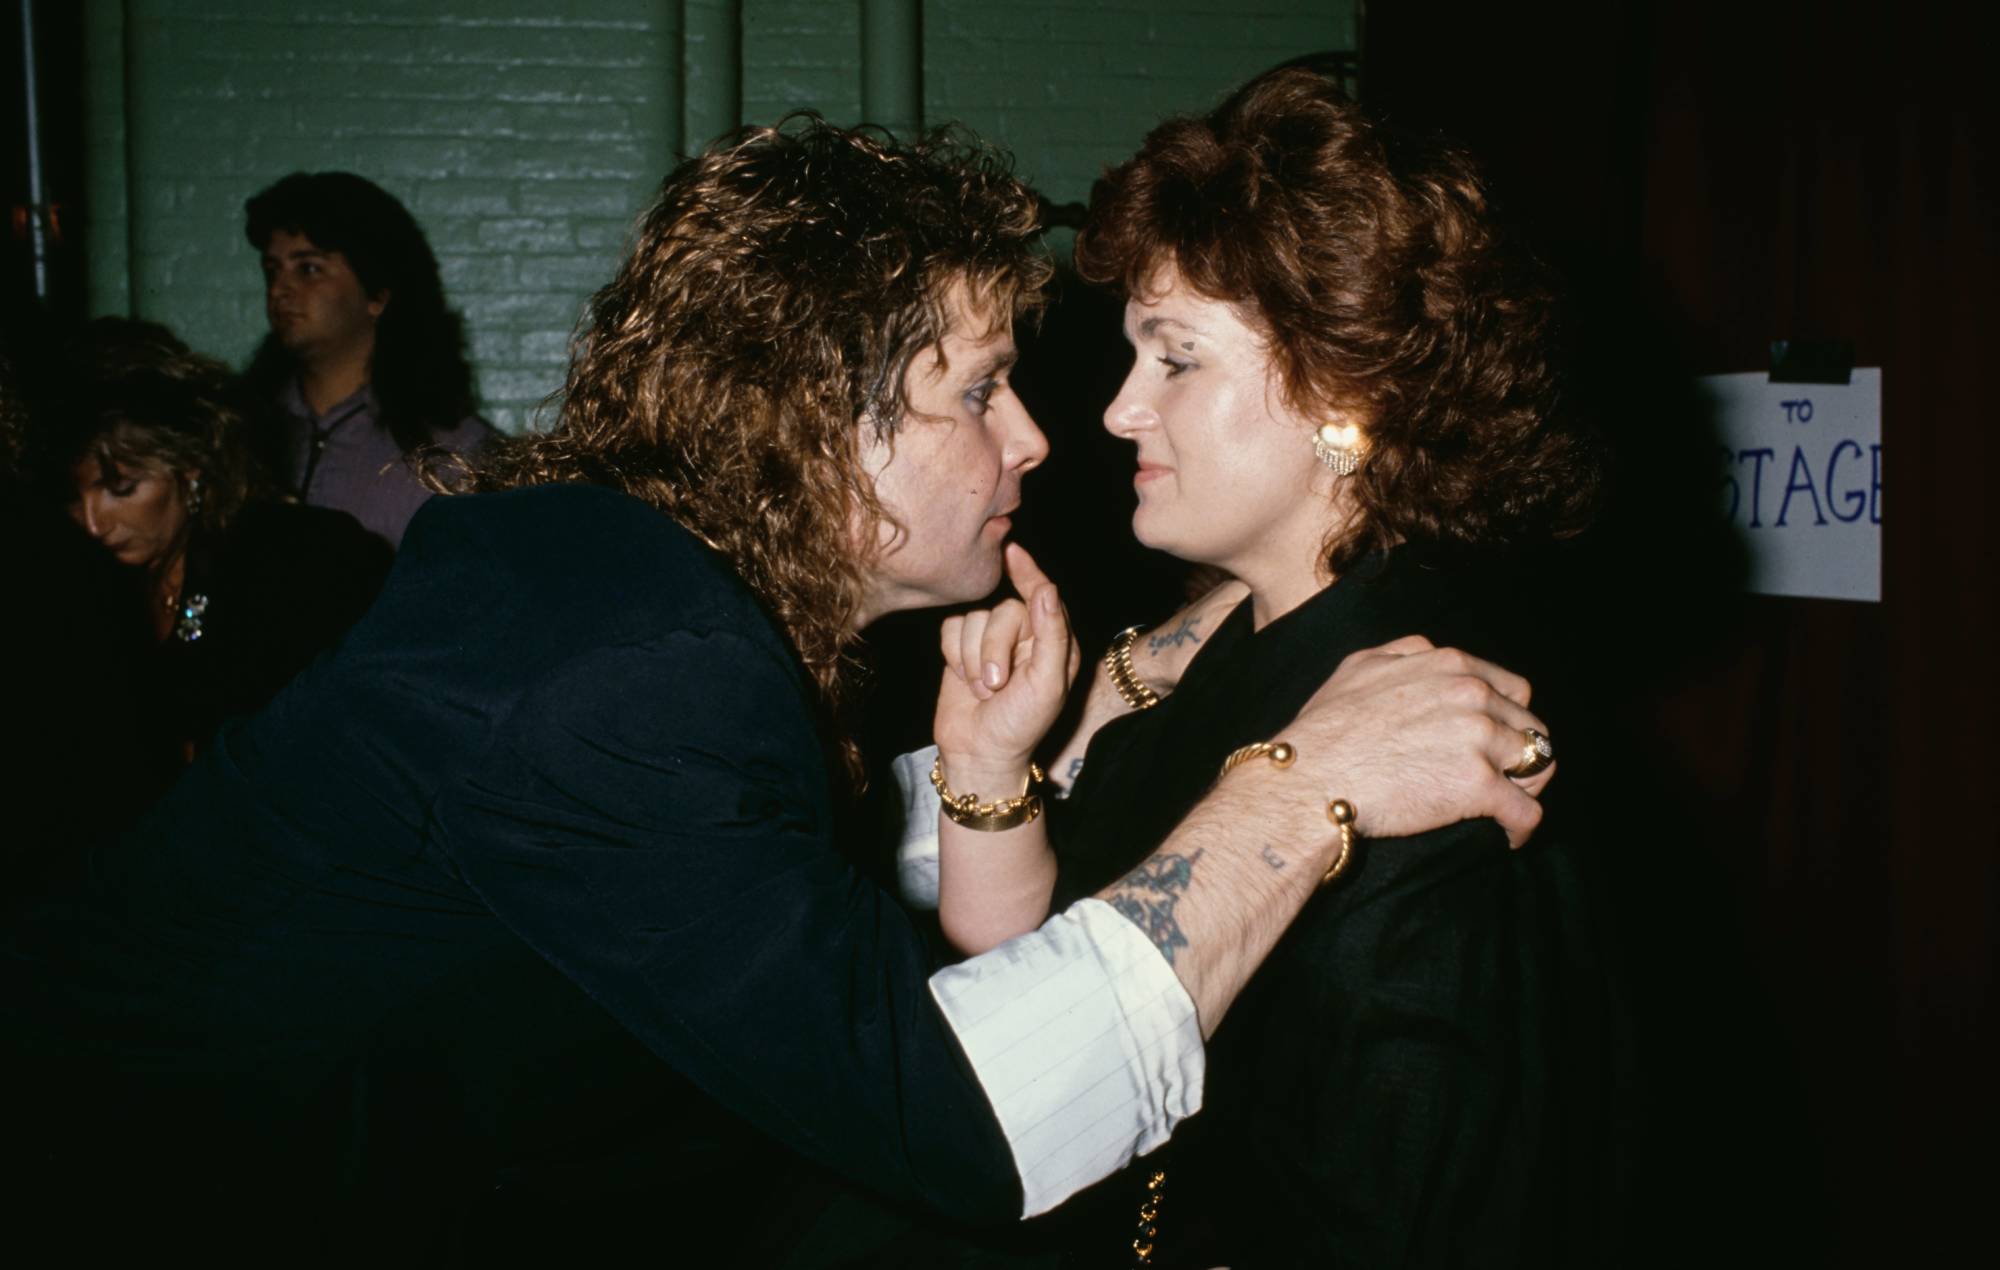 Ozzy Osbourne goes face-to-face with his British manager and wife, Sharon Osbourne, his hands on her shoulders at an event, circa 1985 (Photo by Vinnie Zuffante/Michael Ochs Archives/Getty Images)